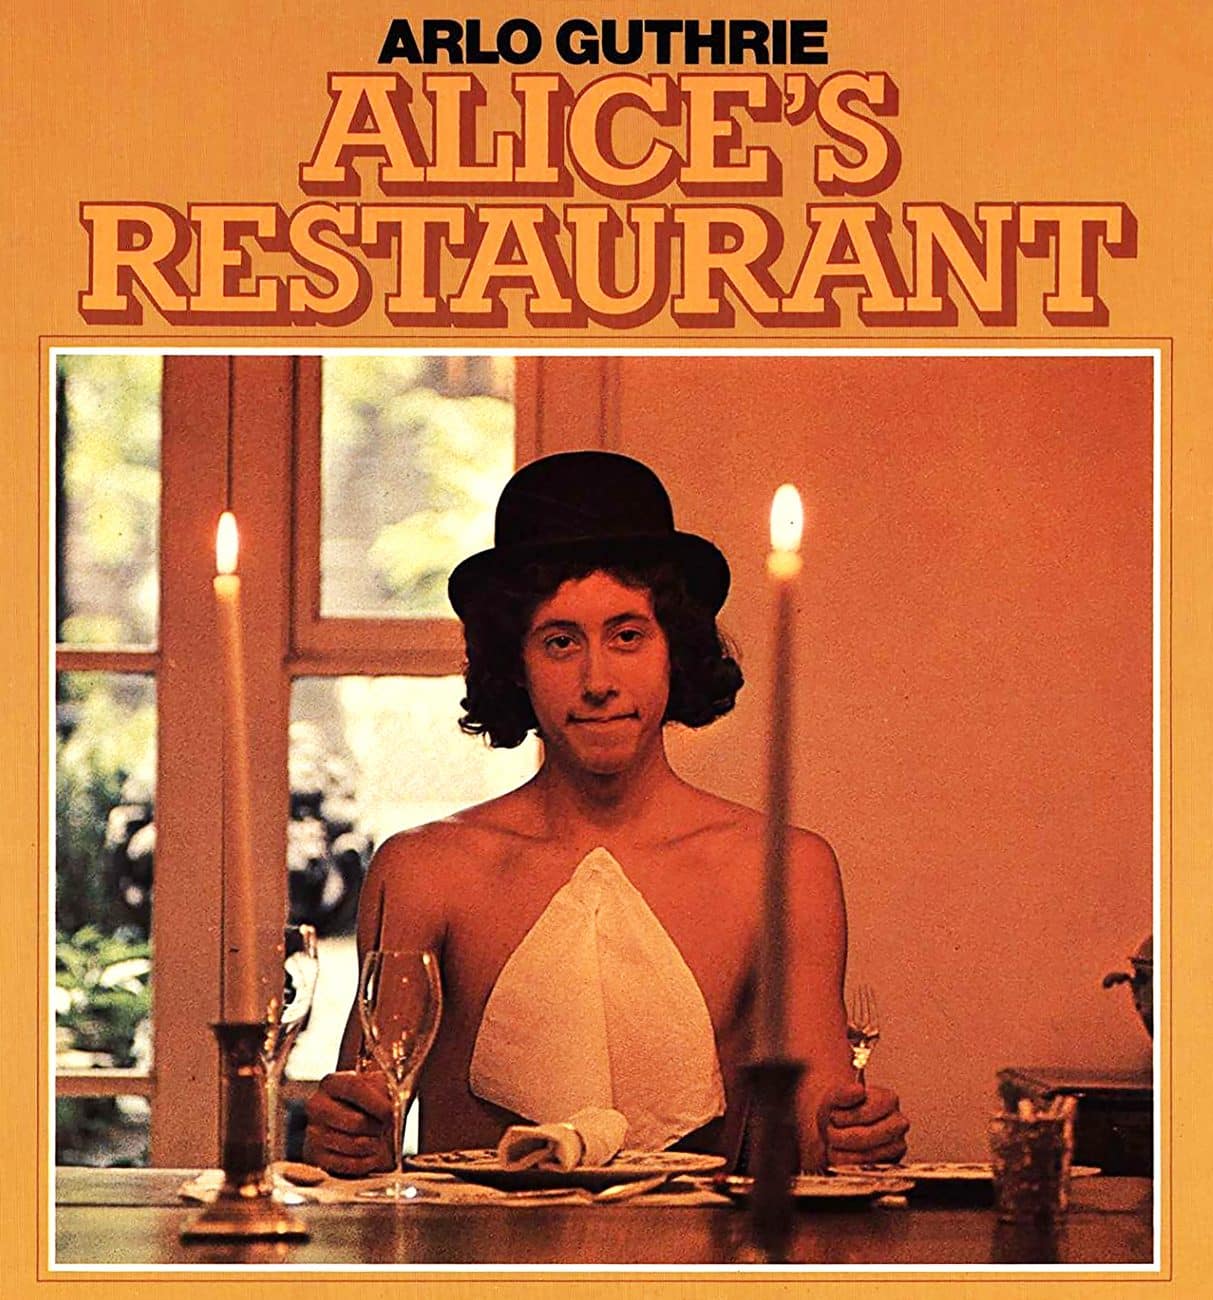 Happy Thanksgiving Song, Part 1: “Alice’s Restaurant” by Arlo Guthrie